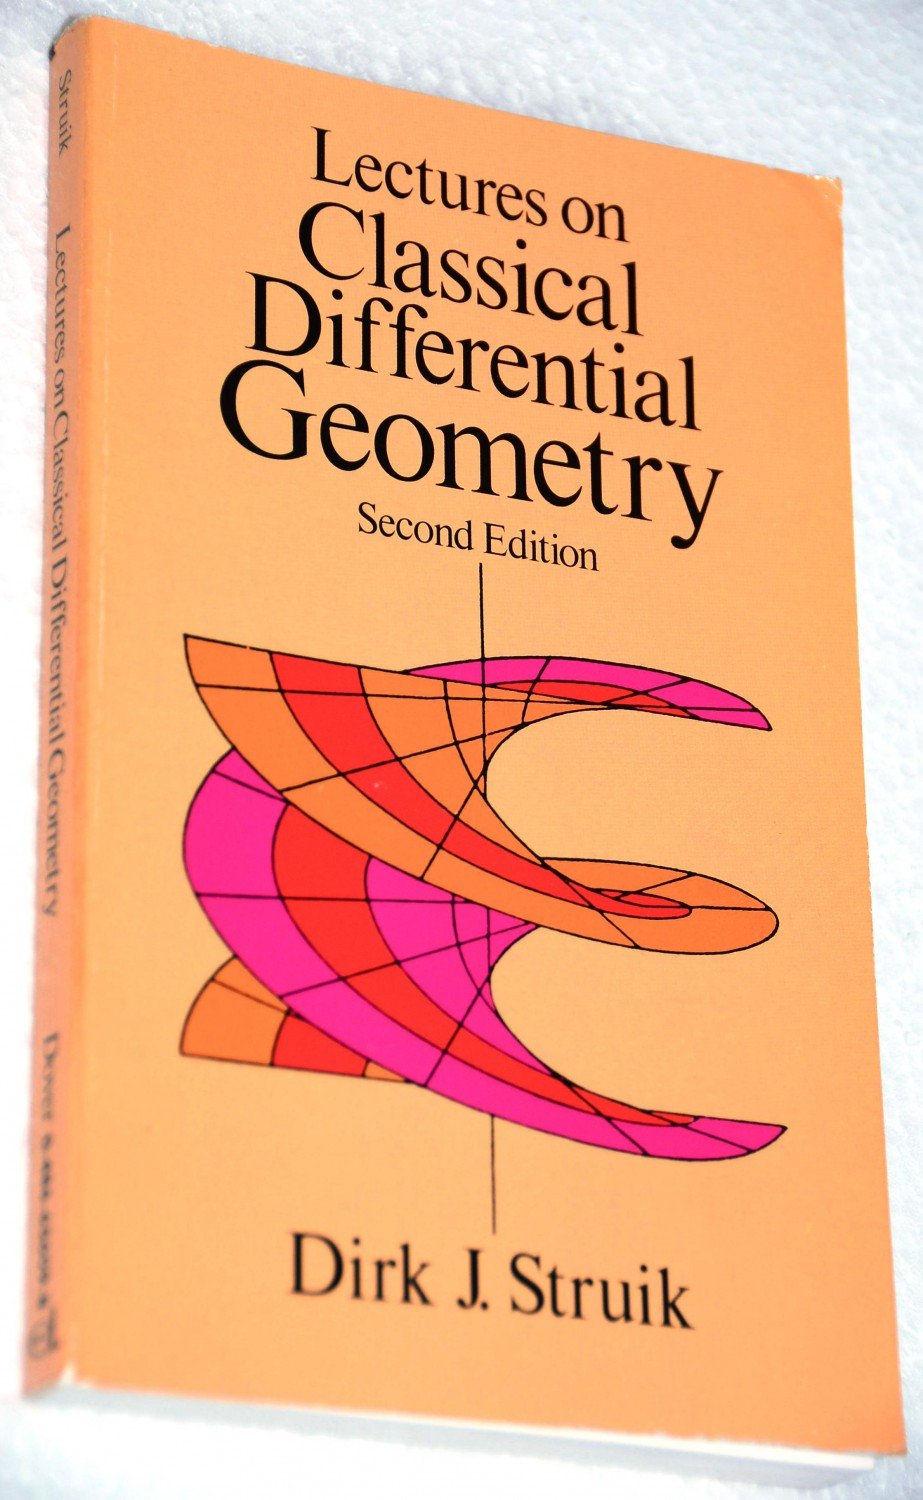 lectures on differential geometry